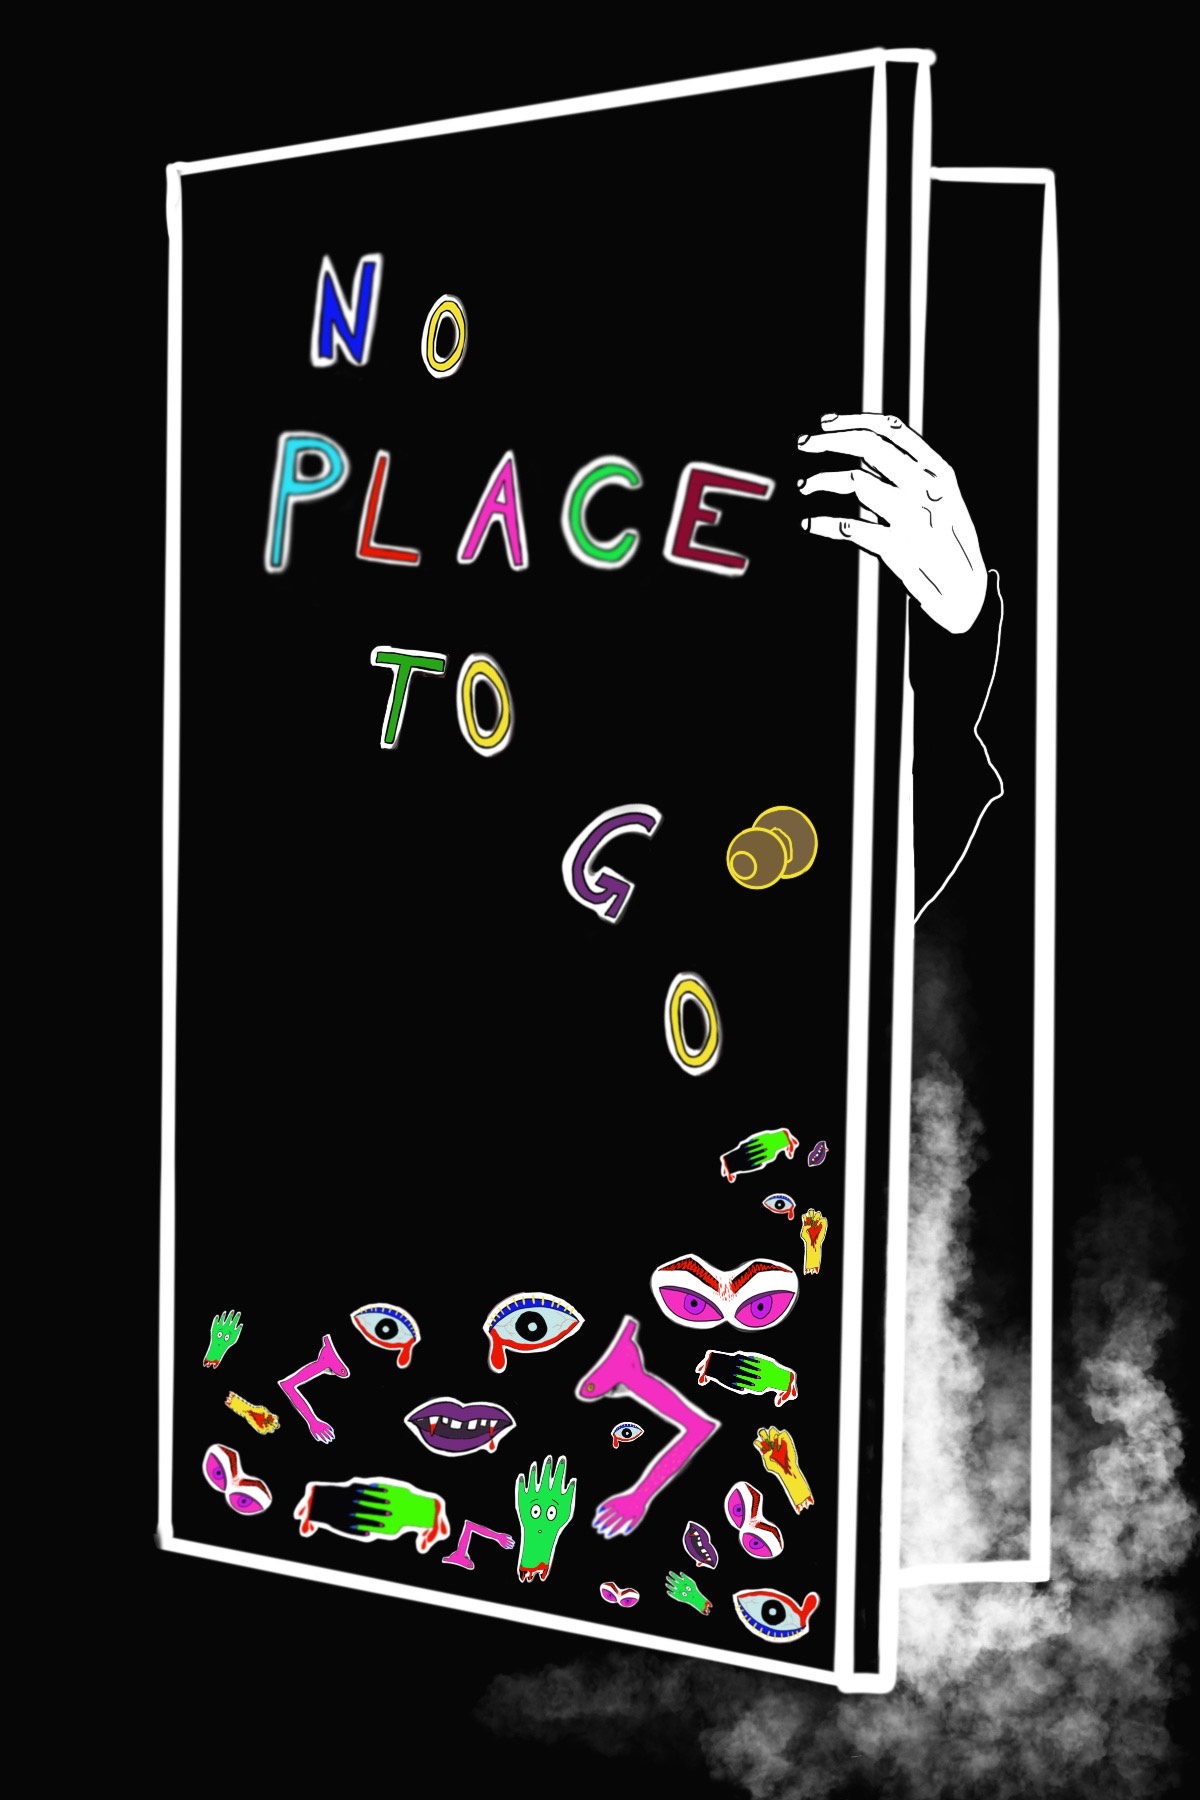 Sketch of a door with the lettering "No Place To Go"